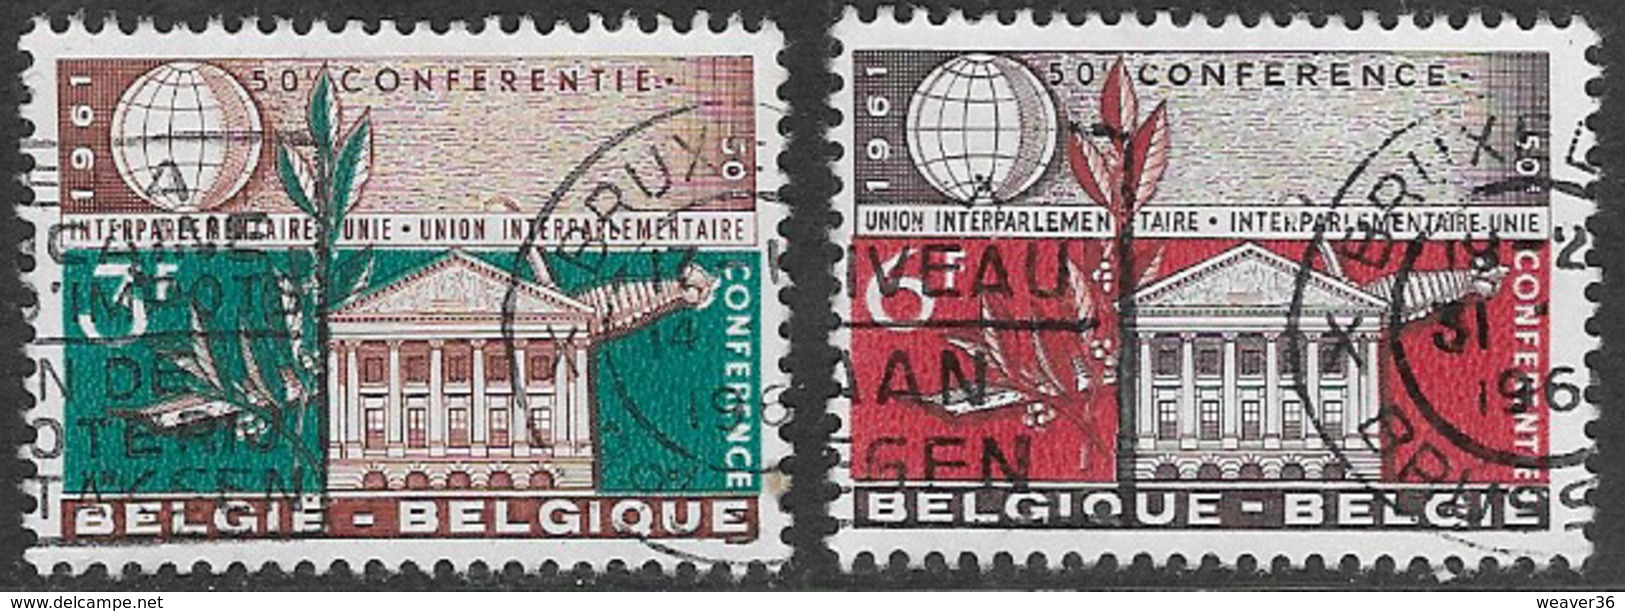 Belgium SG1791-1792 1961 50th Interparliamentary Union Conference Set 2v Complete Good/fine Used [33/28663/6D] - Used Stamps